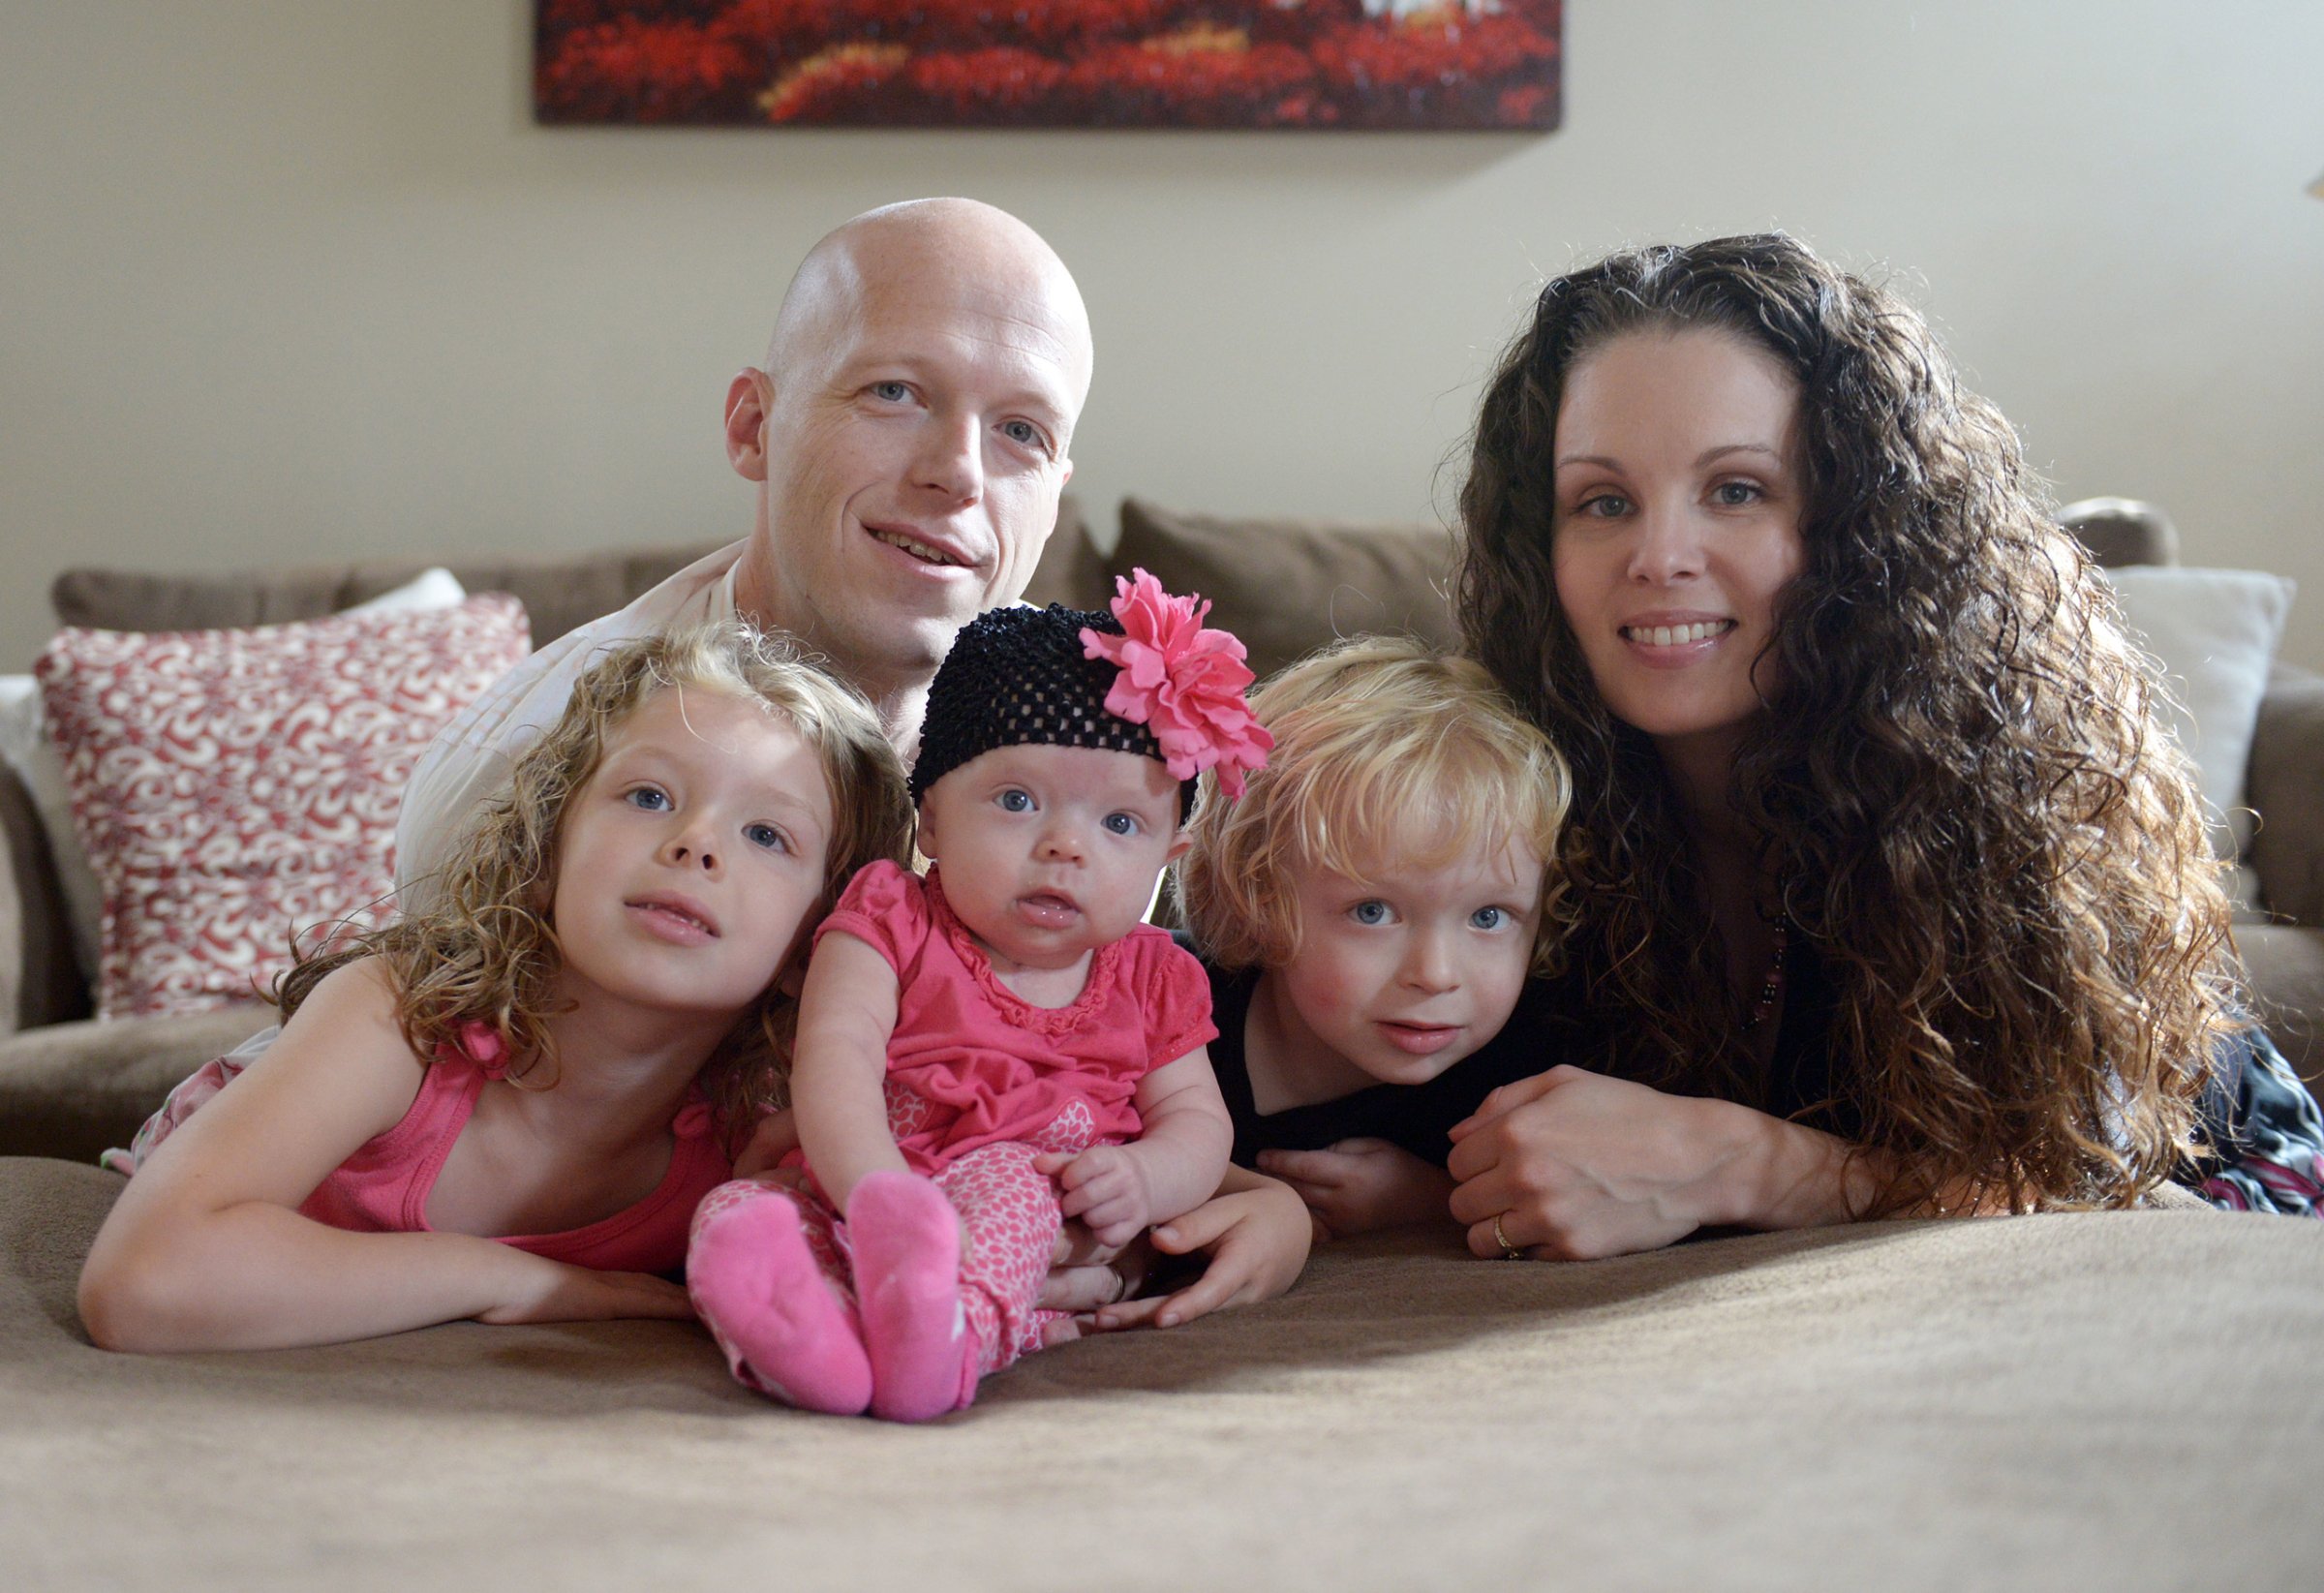 In this Sept. 1, 2014, photo, Willow Short, 4-month-old, center, along with her parents Megan and Mark and sister Liana, 6, and brother Mark, 3, poses for a photo in Sinking Spring, Pa. Willow Short had a heart transplant at 6-days-old. The couple featured in news stories about their difficulties getting medication for the daughter who had a heart transplant were found shot to death in their home along with their three children in apparent murder-suicide, authorities said Sunday, Aug. 7, 2016. (Susan L. Angstadt/Reading Eagle via AP)